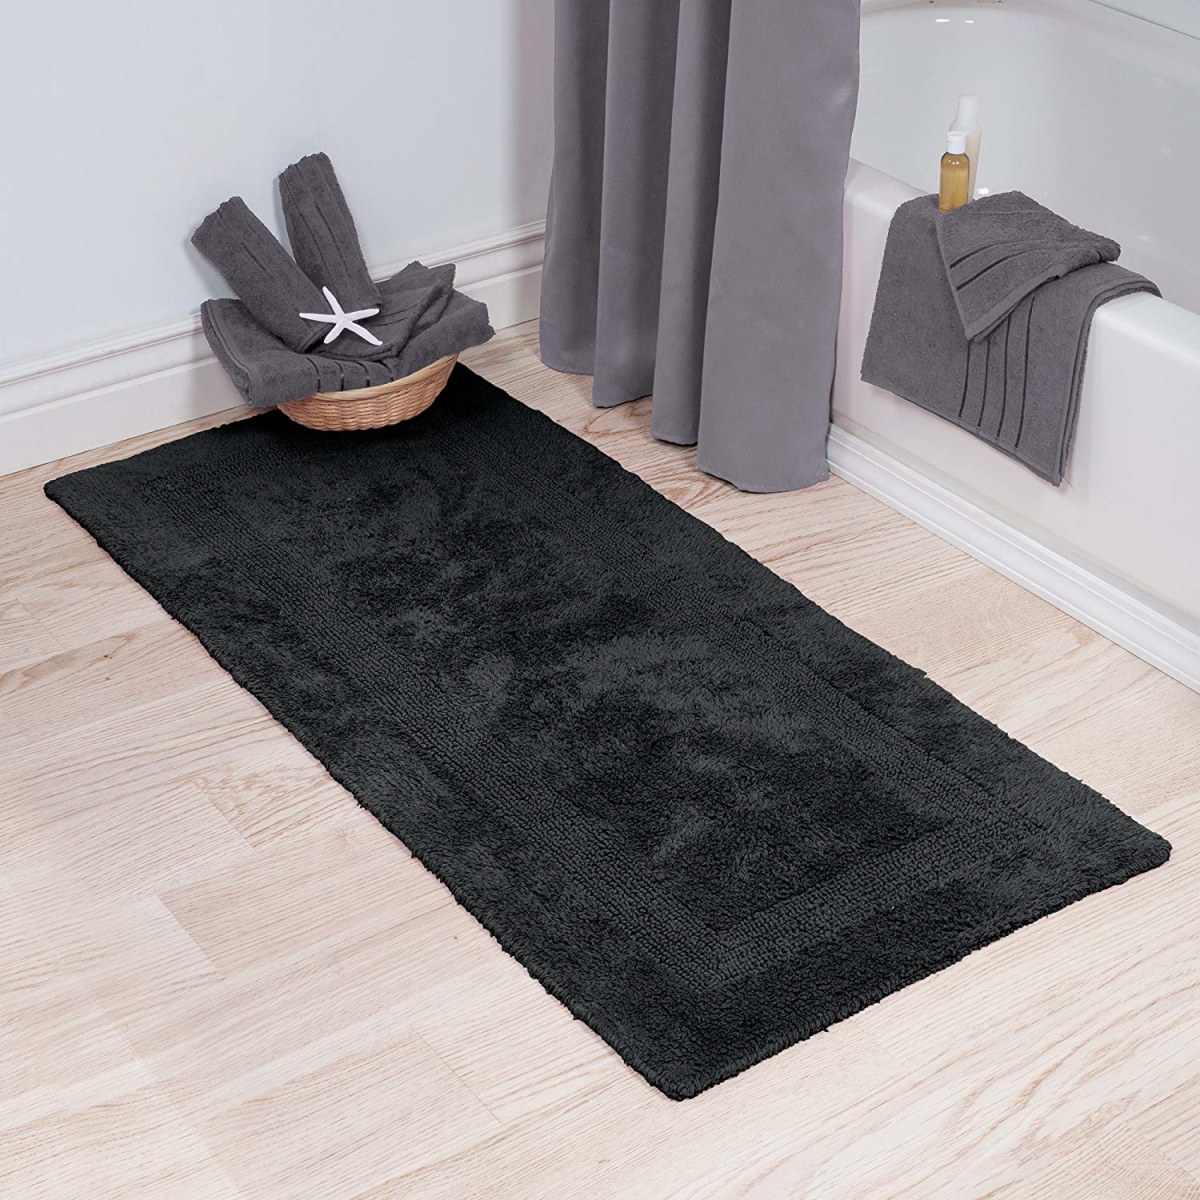 Picture of Bedford Home 67A-82825 100 Percent Cotton Reversible Long Bath Rug - Black - 24 x 60 in.